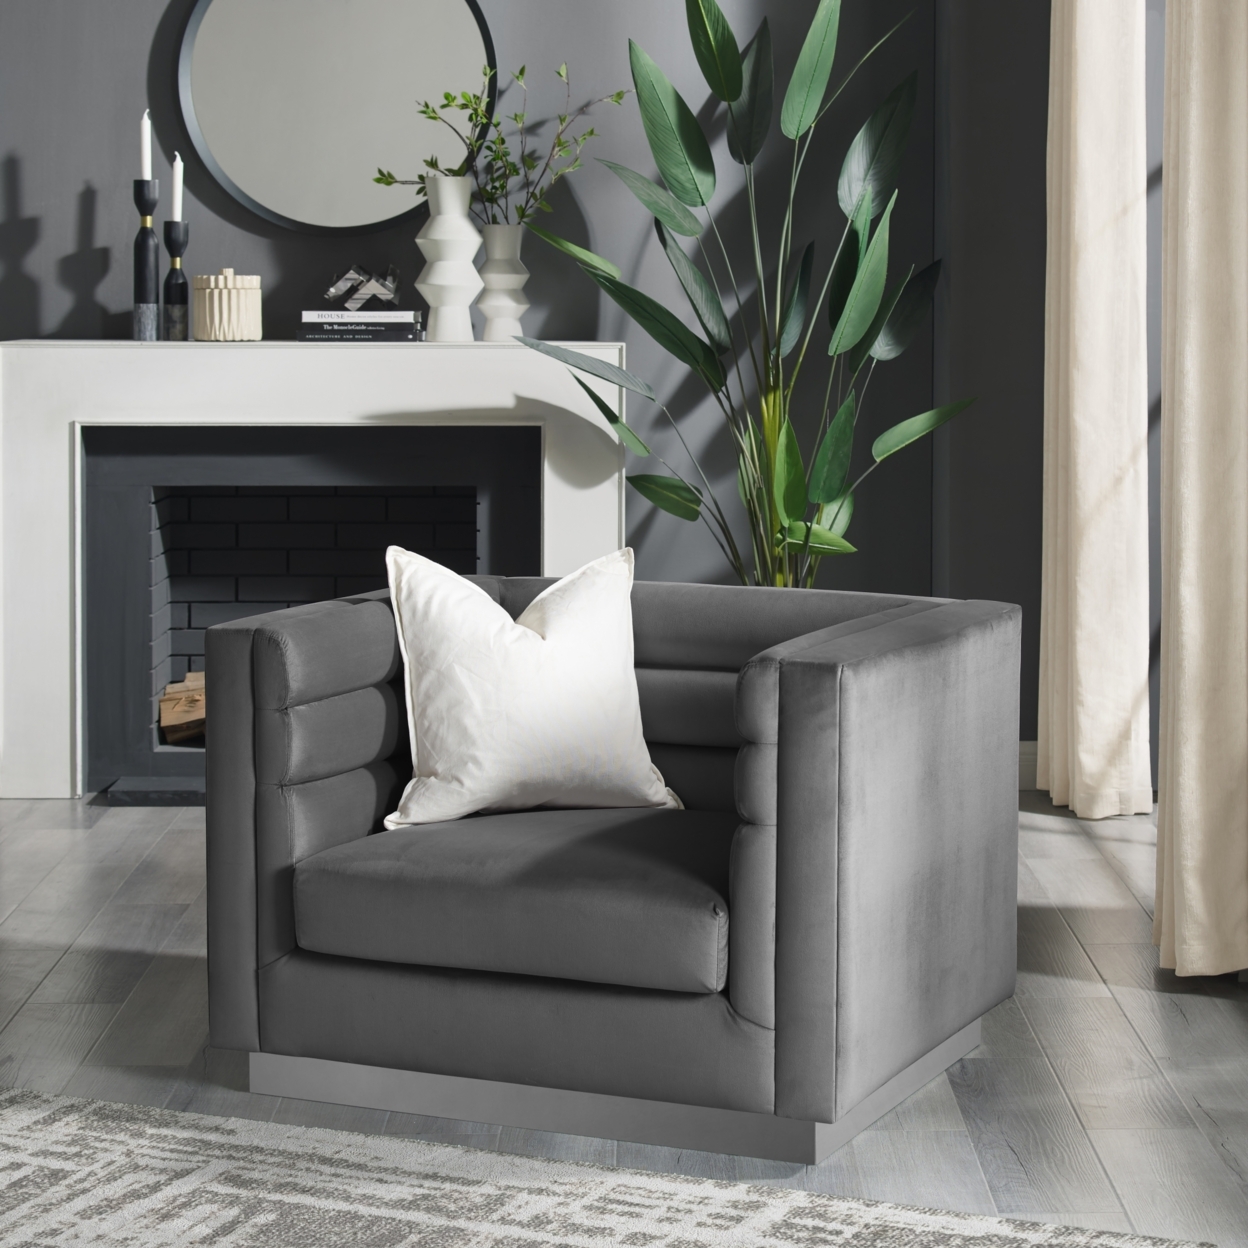 Aja Club Chair-Upholstered-Metal Base, Square Arms-Horizontal Channel Tufting - dark grey